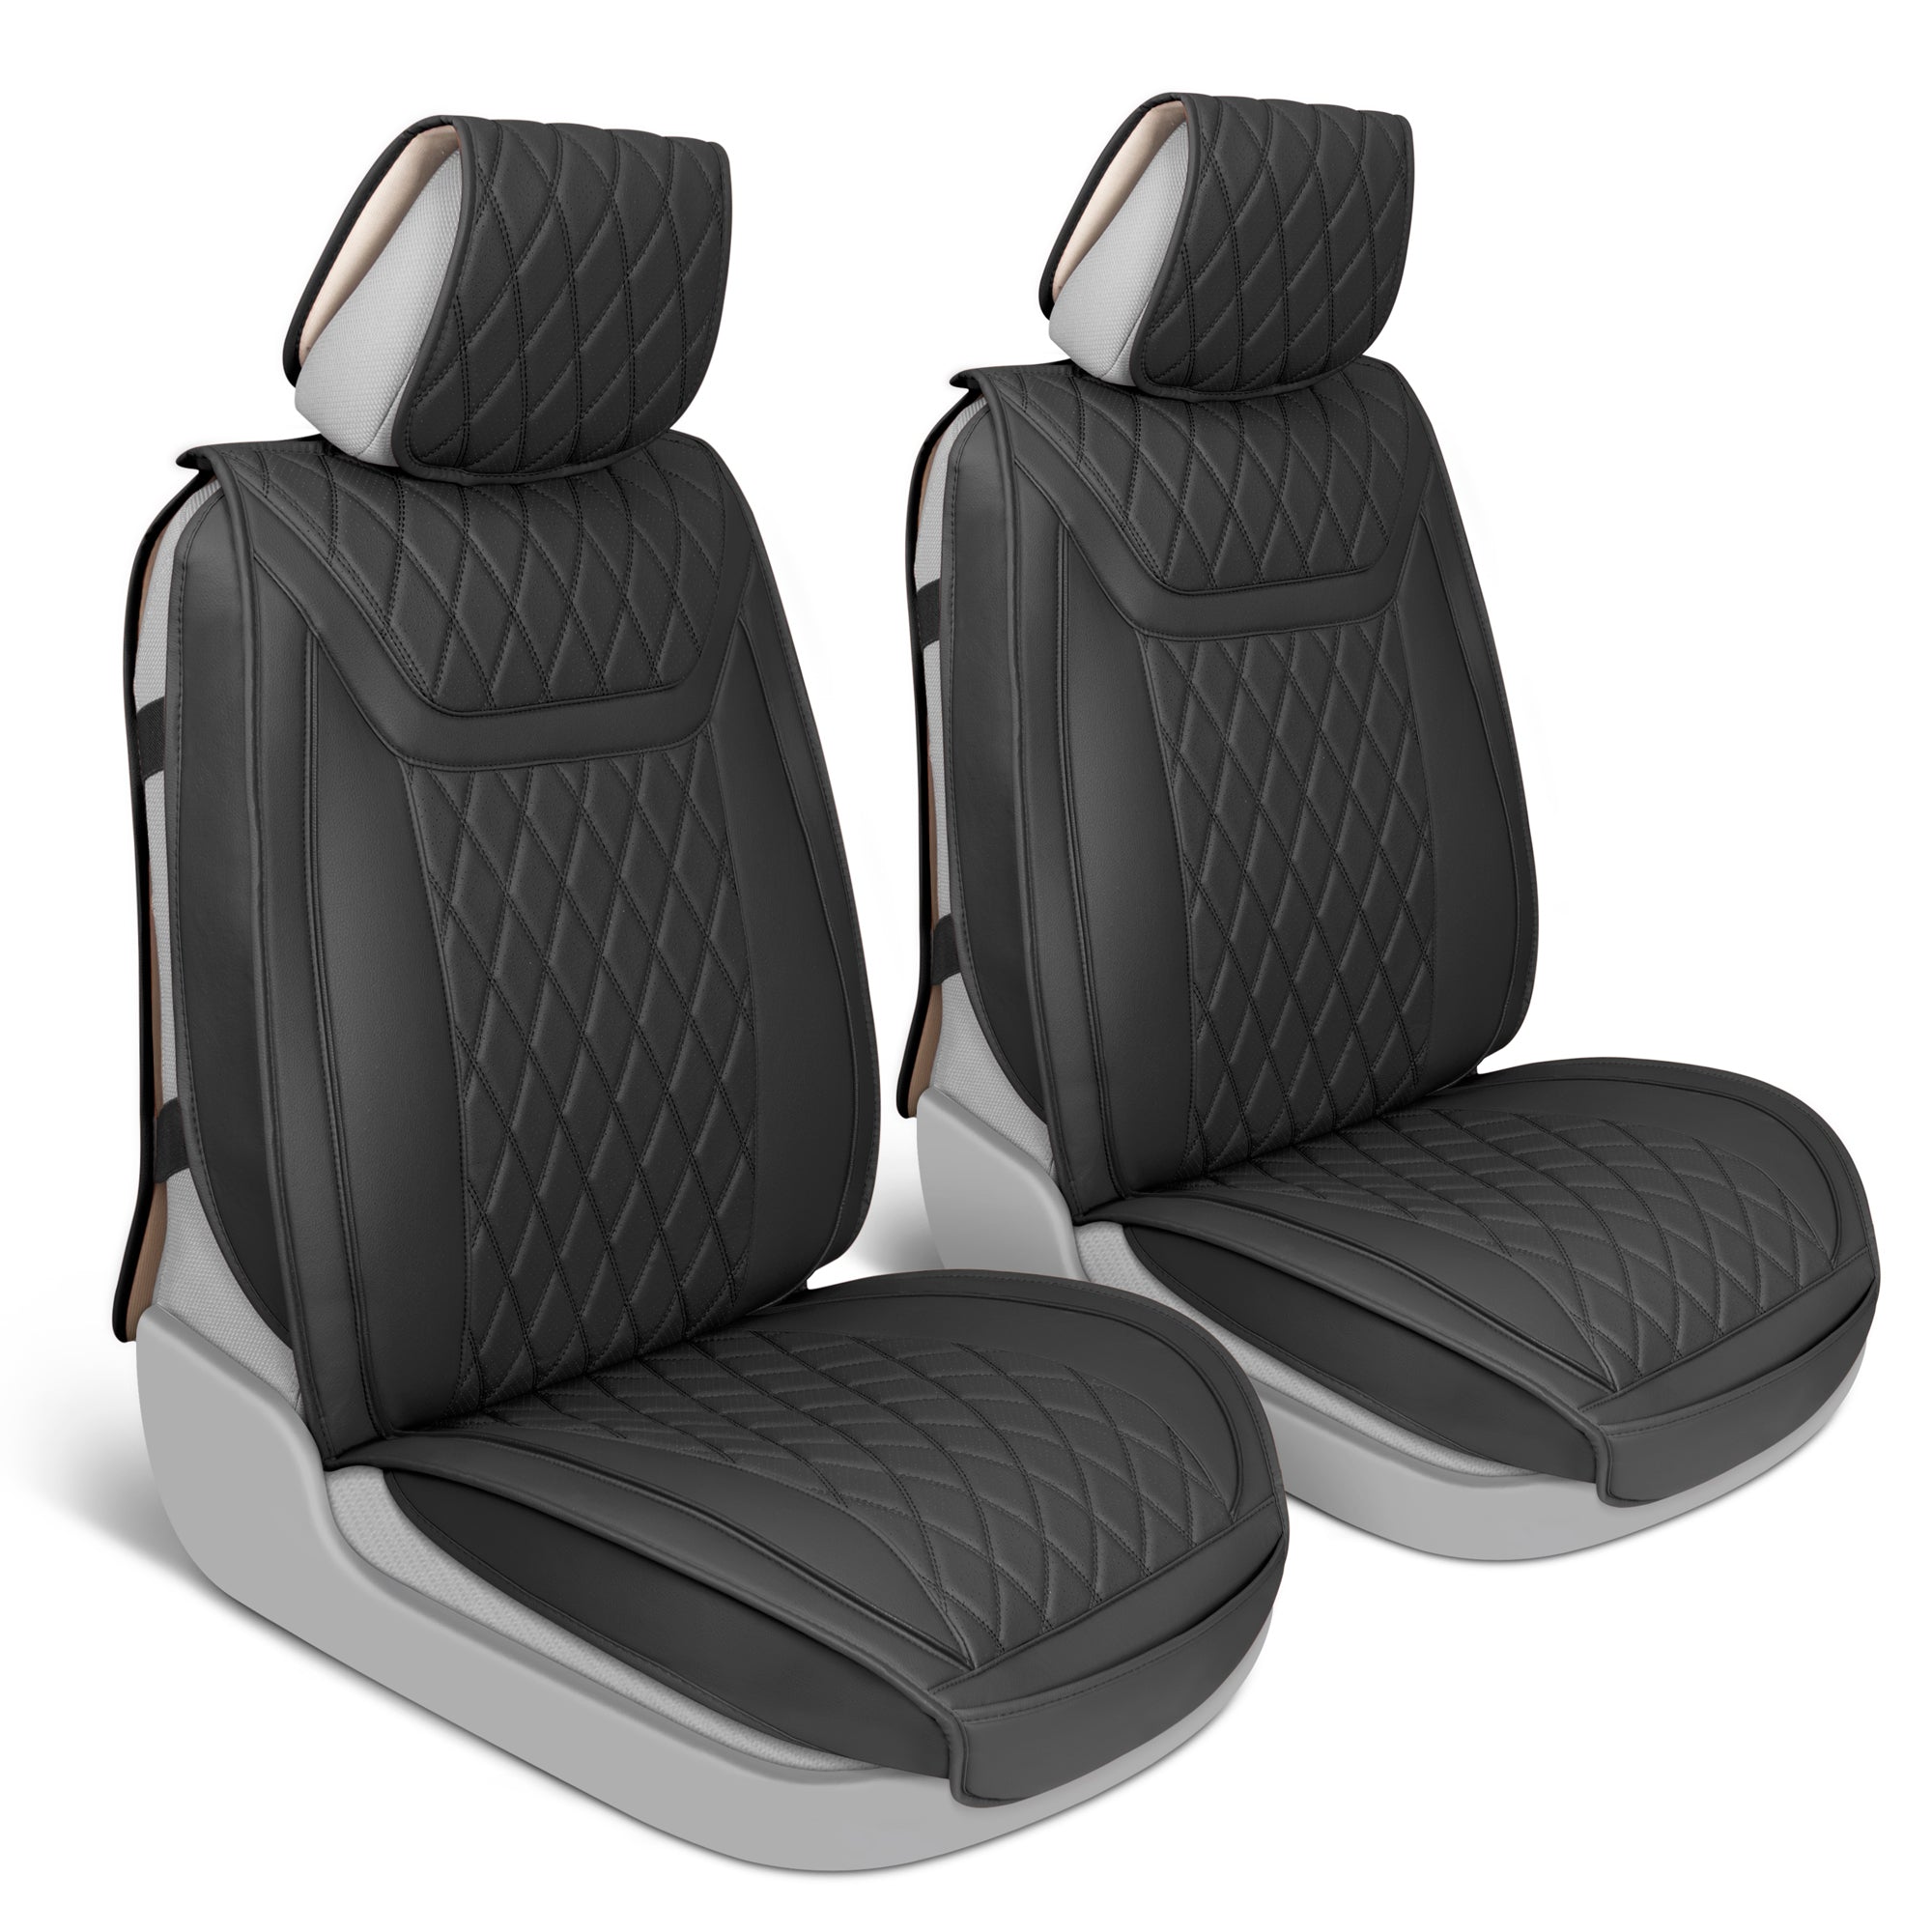 MotorBox Car Seat Covers – Ranch Leatherette Faux Leather Black Seat Covers for Car – Diamond Stitched Cushioned Seat Protectors for Automotive Accessories, Trucks, SUV, Car – Two Front Covers - Black